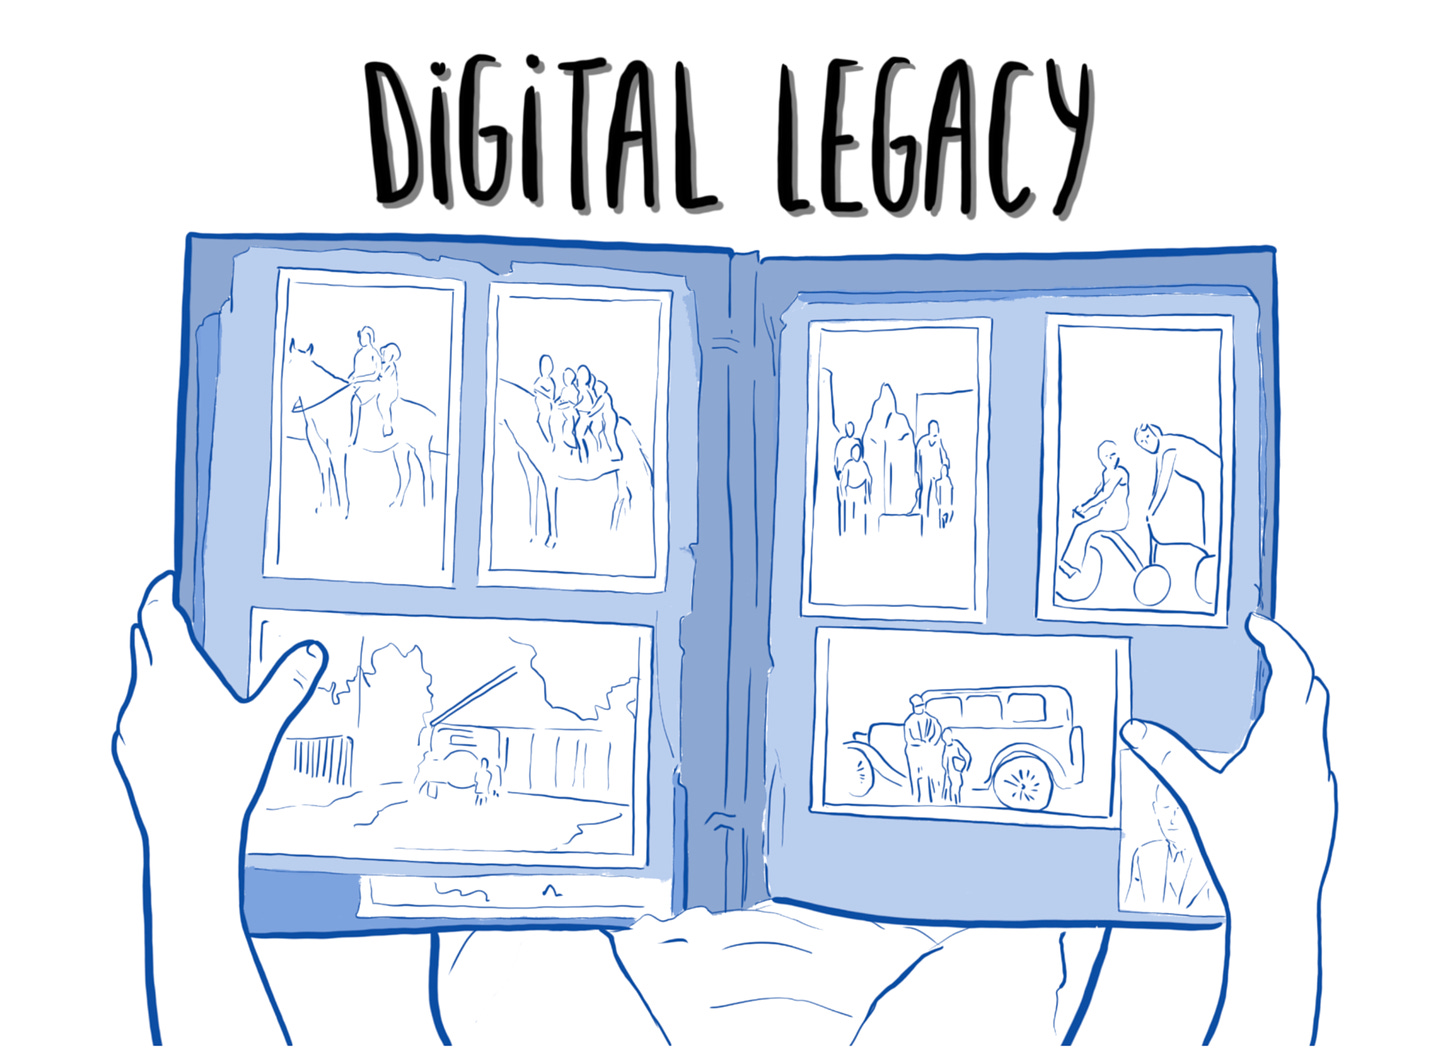 Title: “DIGITAL LEGACY” There’s an illustration in navy blue on white of a top down view of a person holding a family photo album, with line drawings of photos showing horse riding and learning to ride a bike, etc.